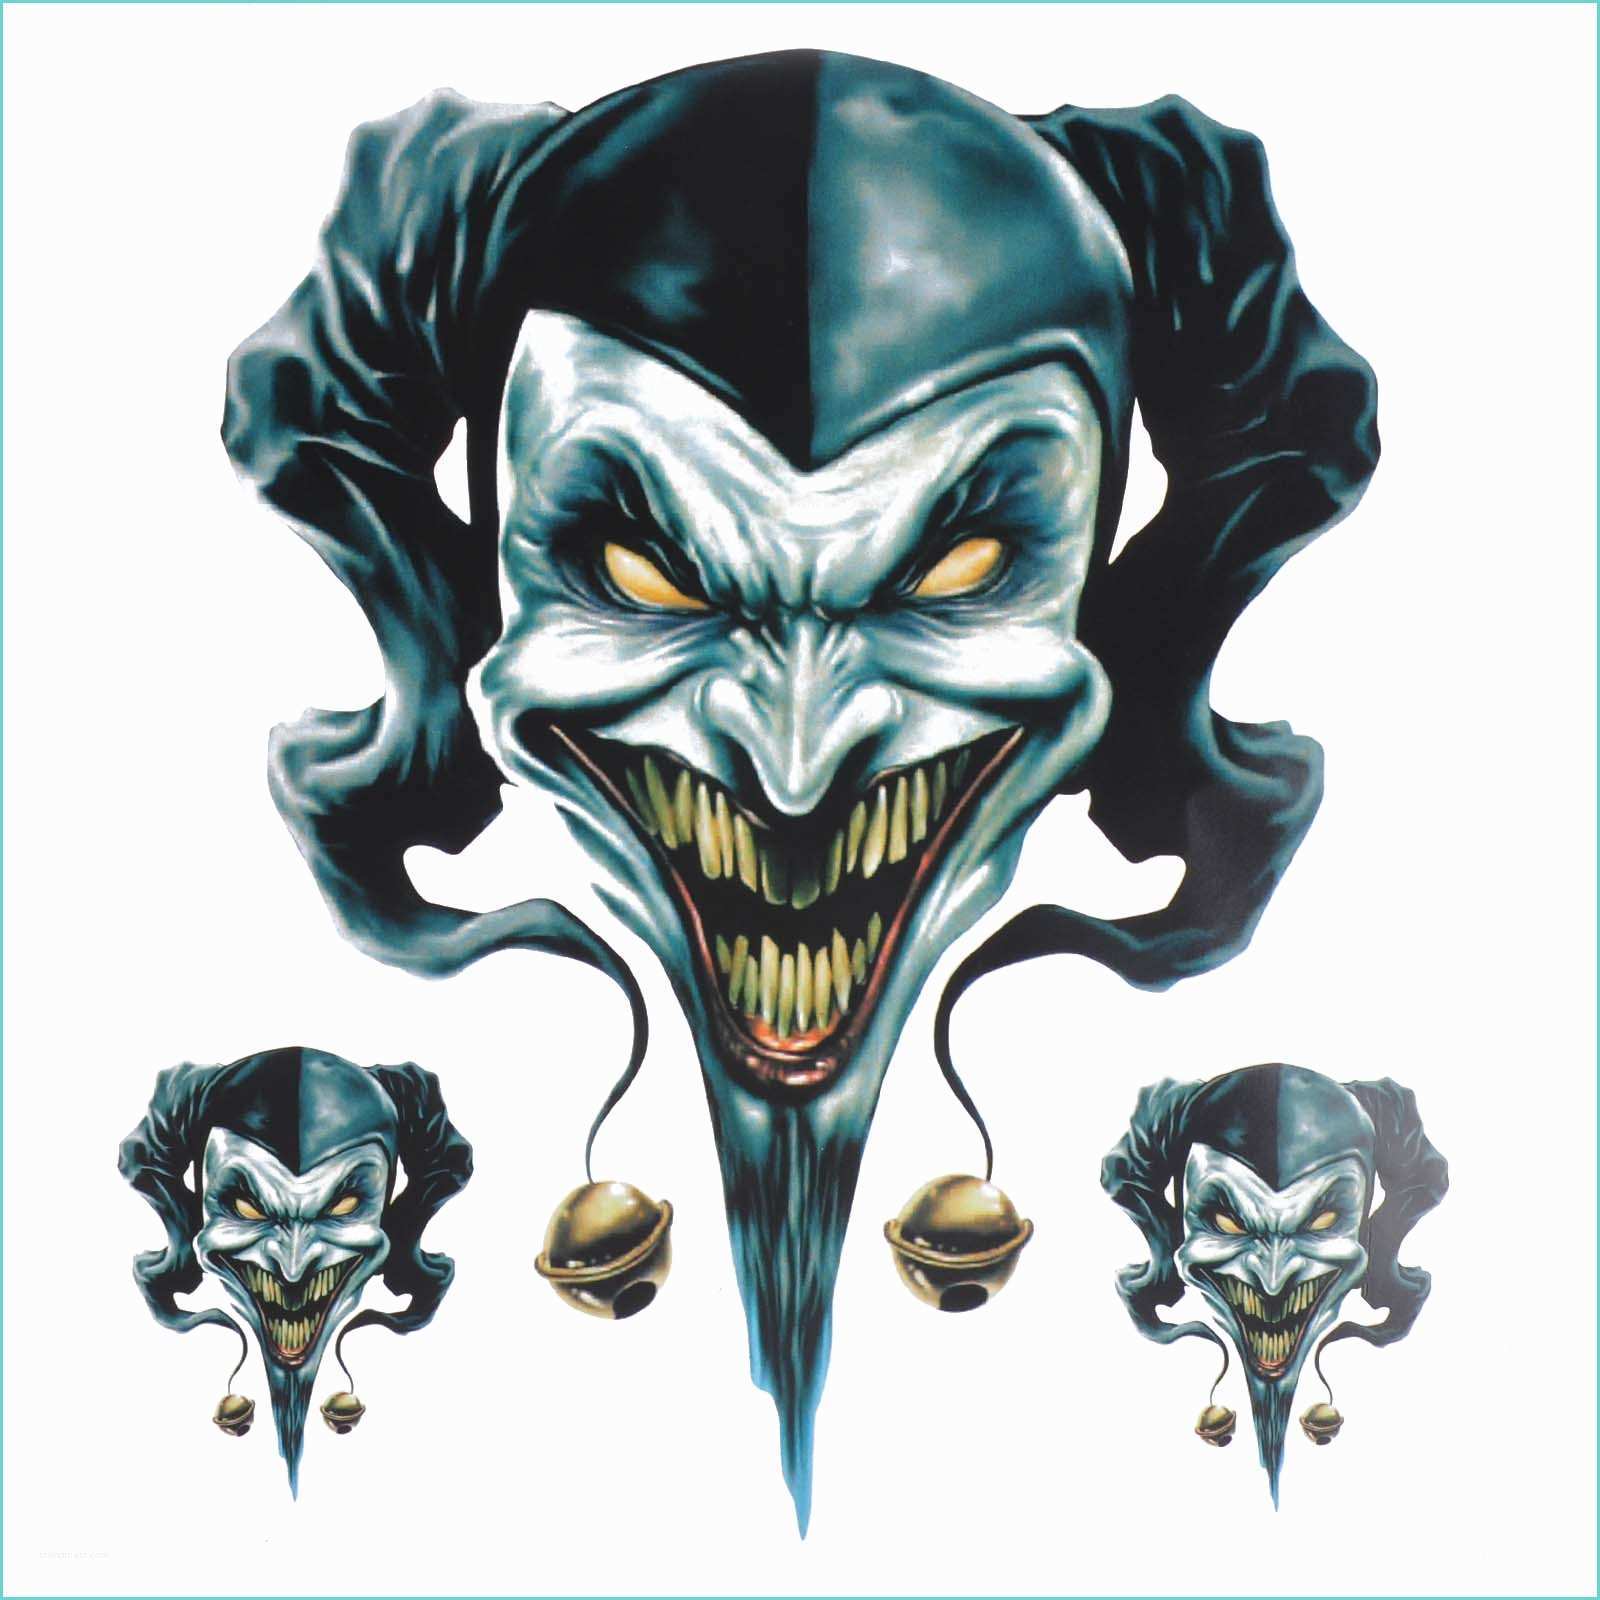 New Bike Stickers Design Clown Jester Graphic Sticker Decal Set for Motorcycle